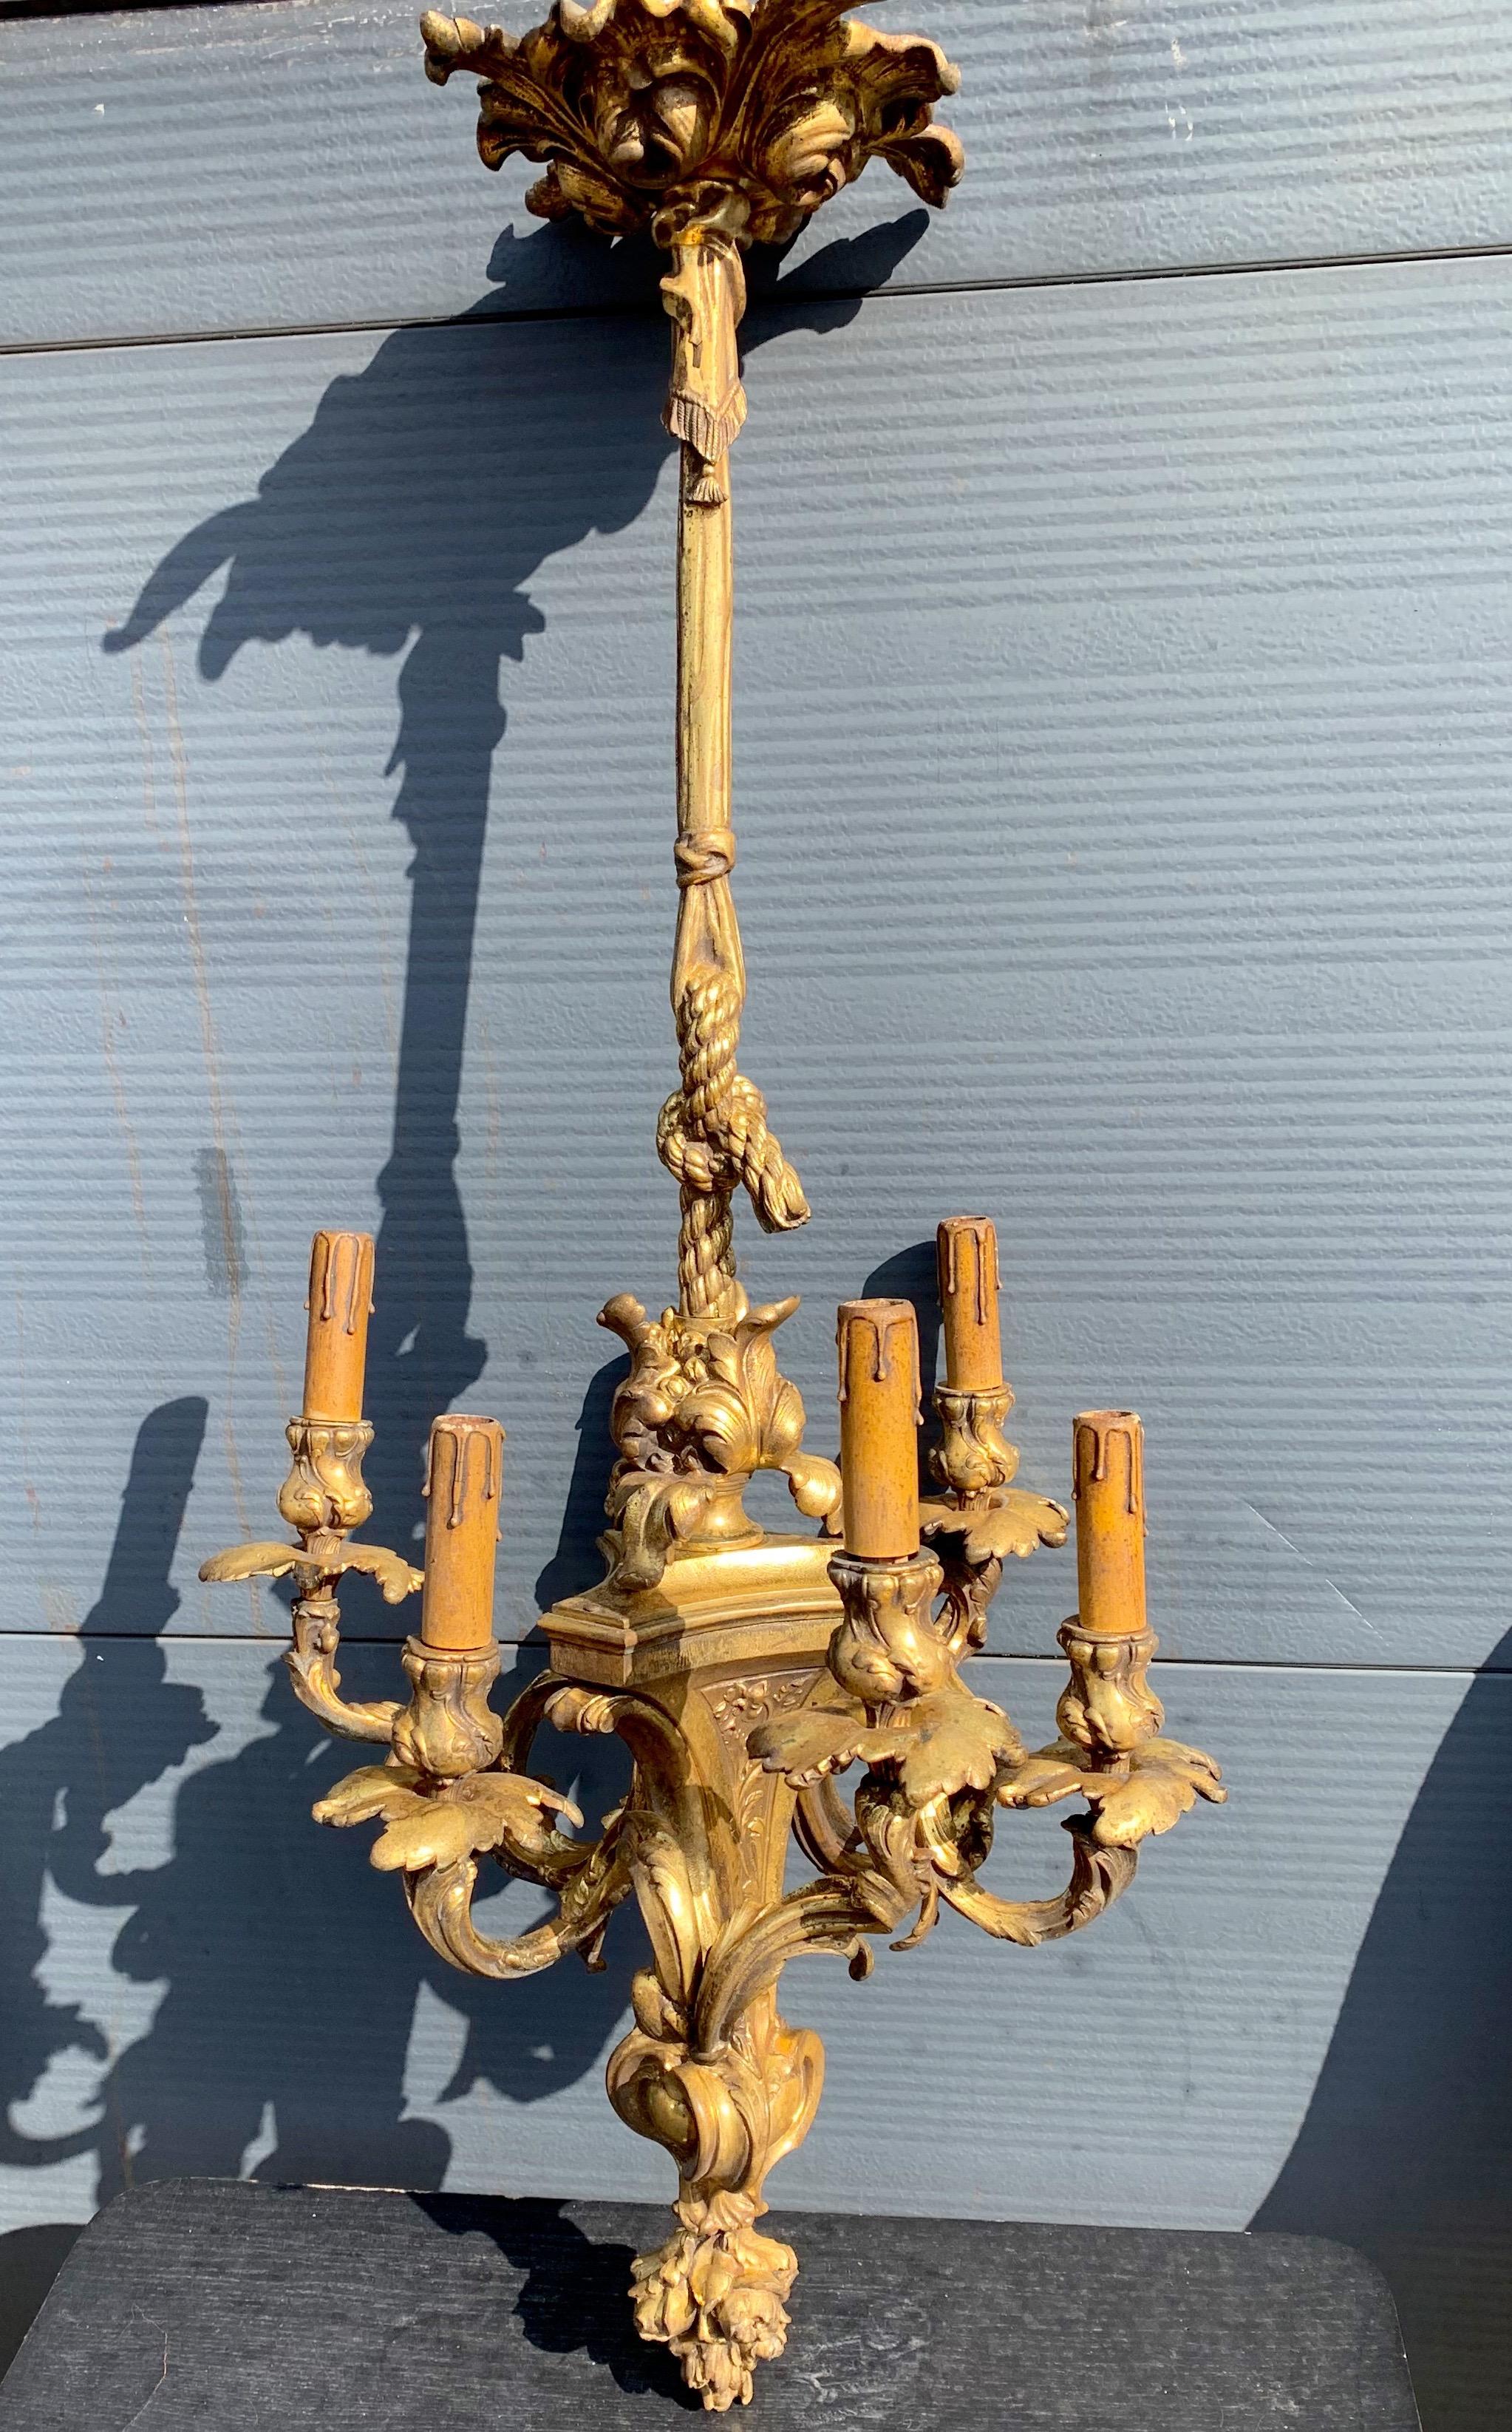 Stunning floral theme chandelier from the late 1800s. 

If you are looking for a truly stylish, well proportioned and top museum quality antique fixture then this work of lighting art from the late 19th century could be perfect for you. The overall